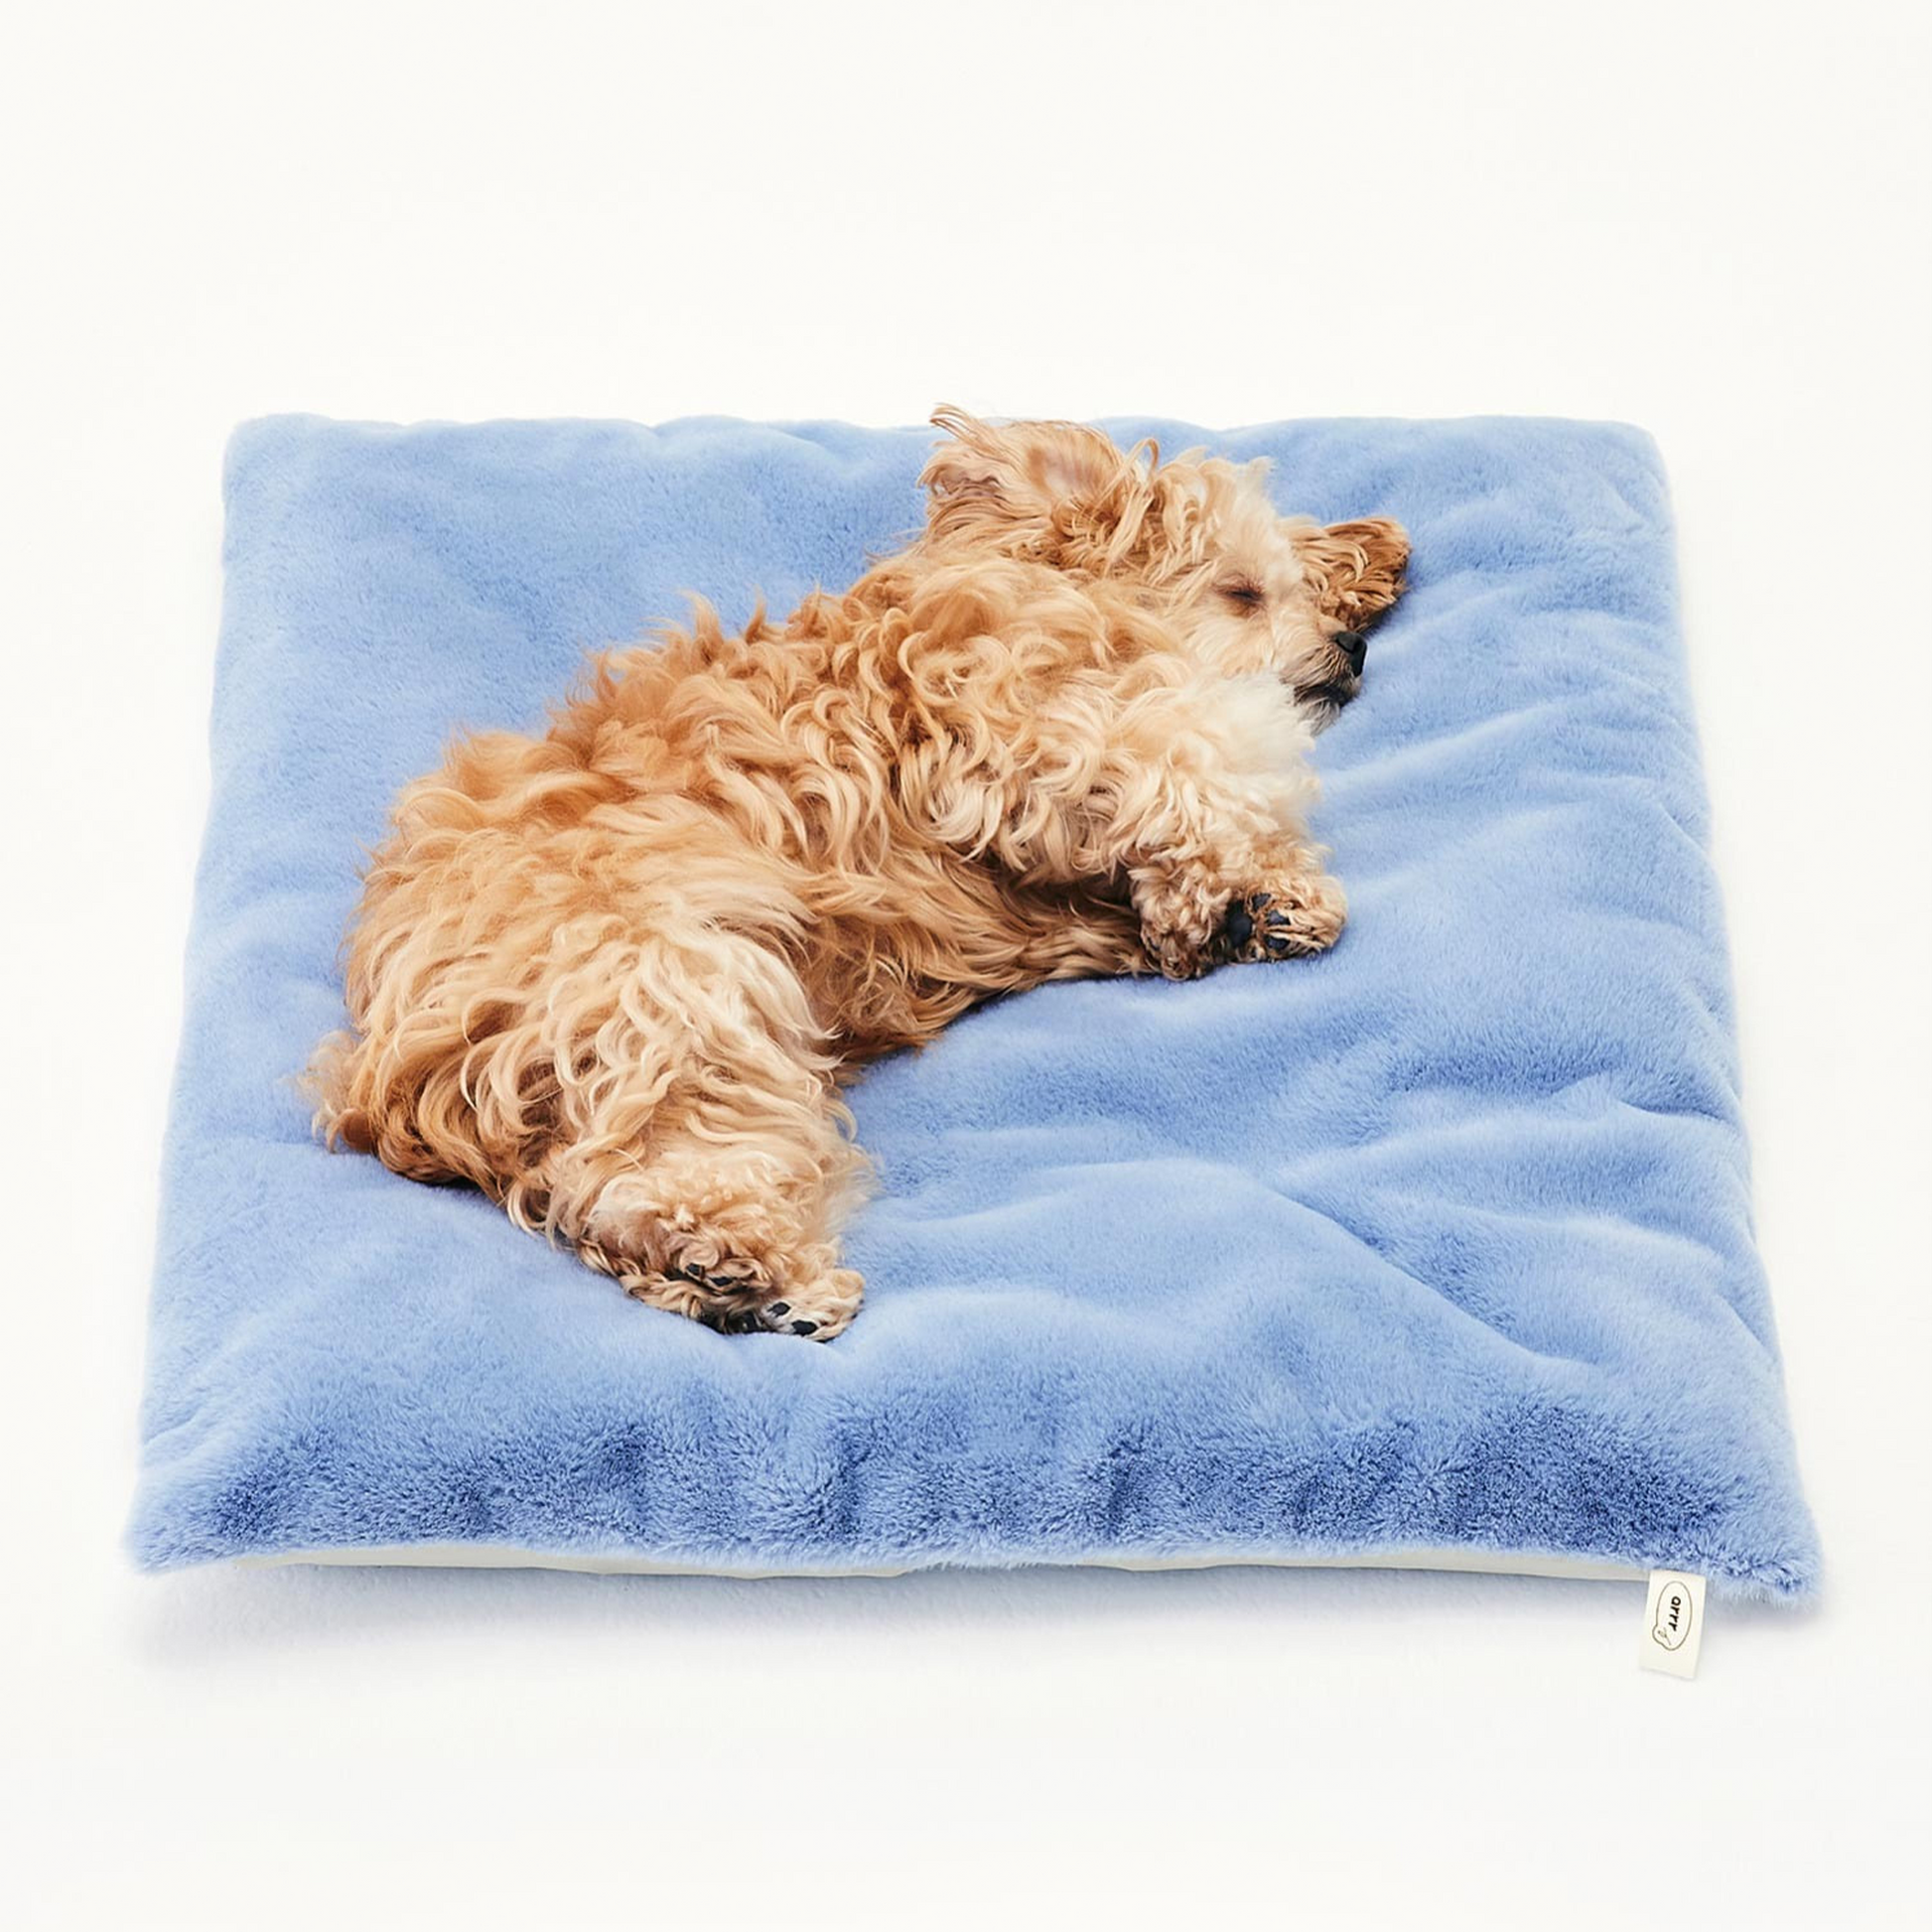 Arrr double-sided pet sleeping cushion in Cashmere Blue colour. One side features cool material, while the other side is made of soft warm material.